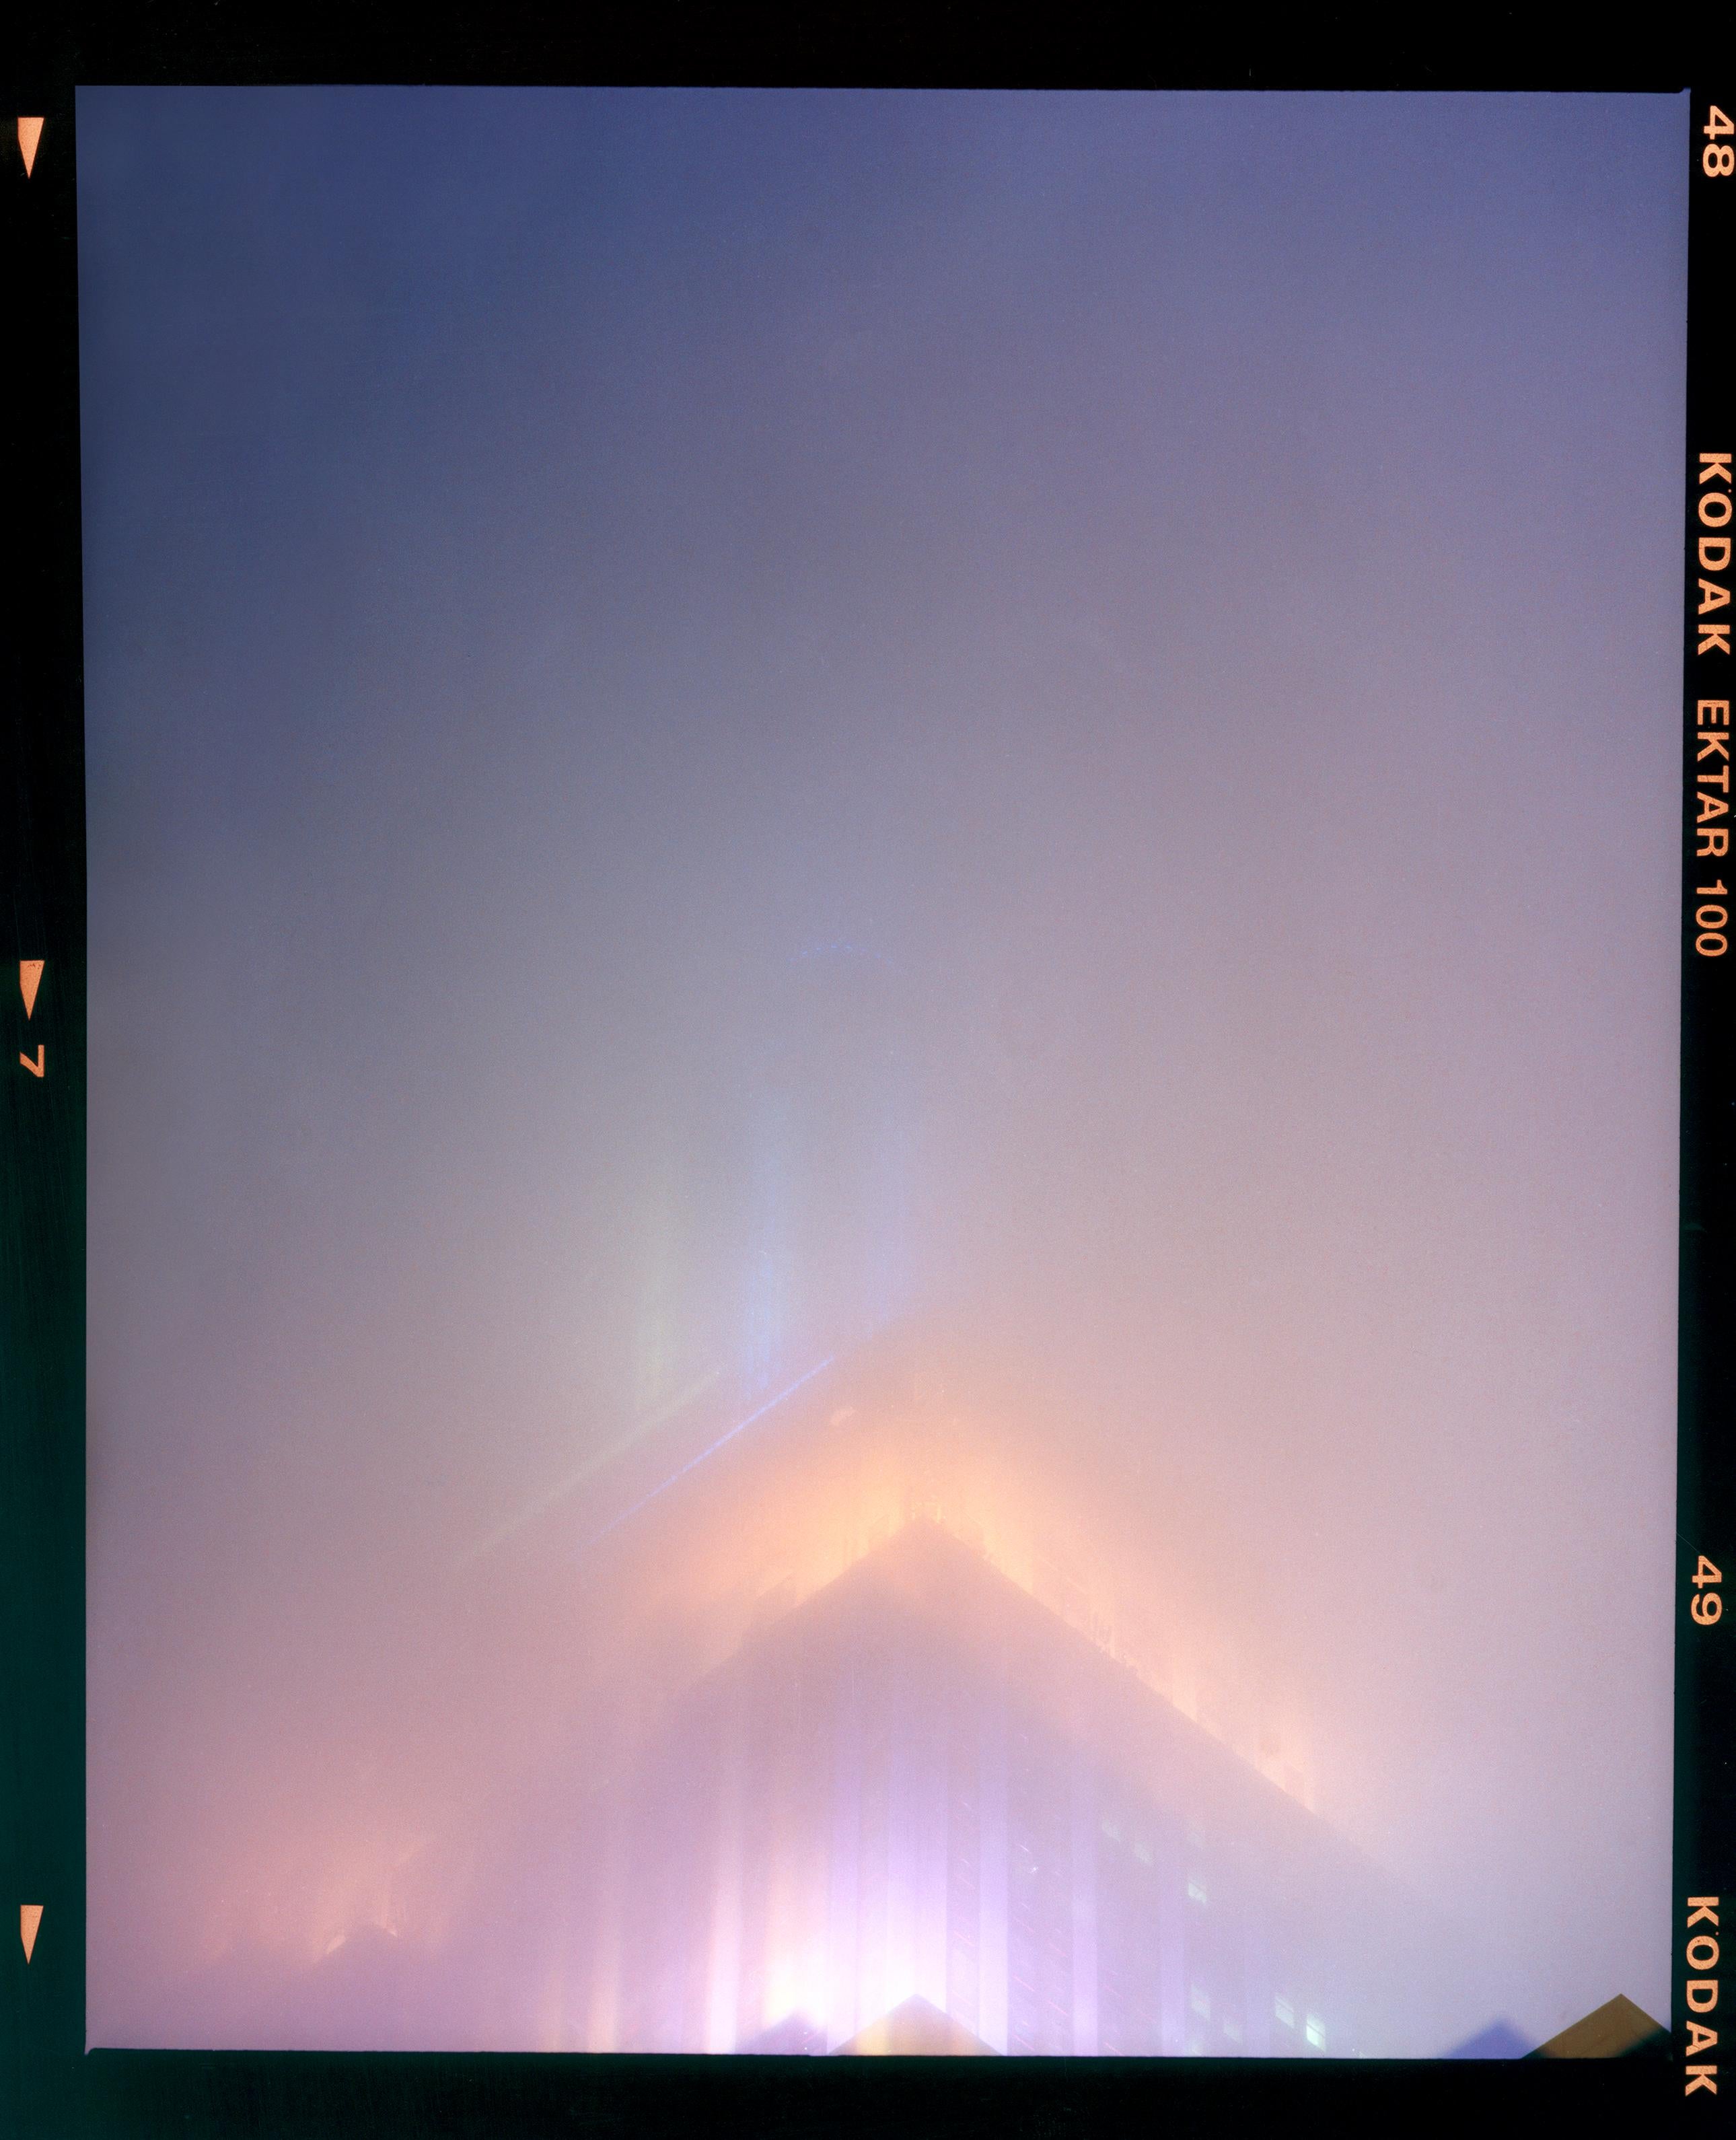 'NOMAD VI (Film Rebate)', New York. Richard Heeps has photographed the iconic Empire State building in the mist. The NOMAD sequence of photographs capture the art deco architecture illuminated by changing colours, and is part of Richard's street